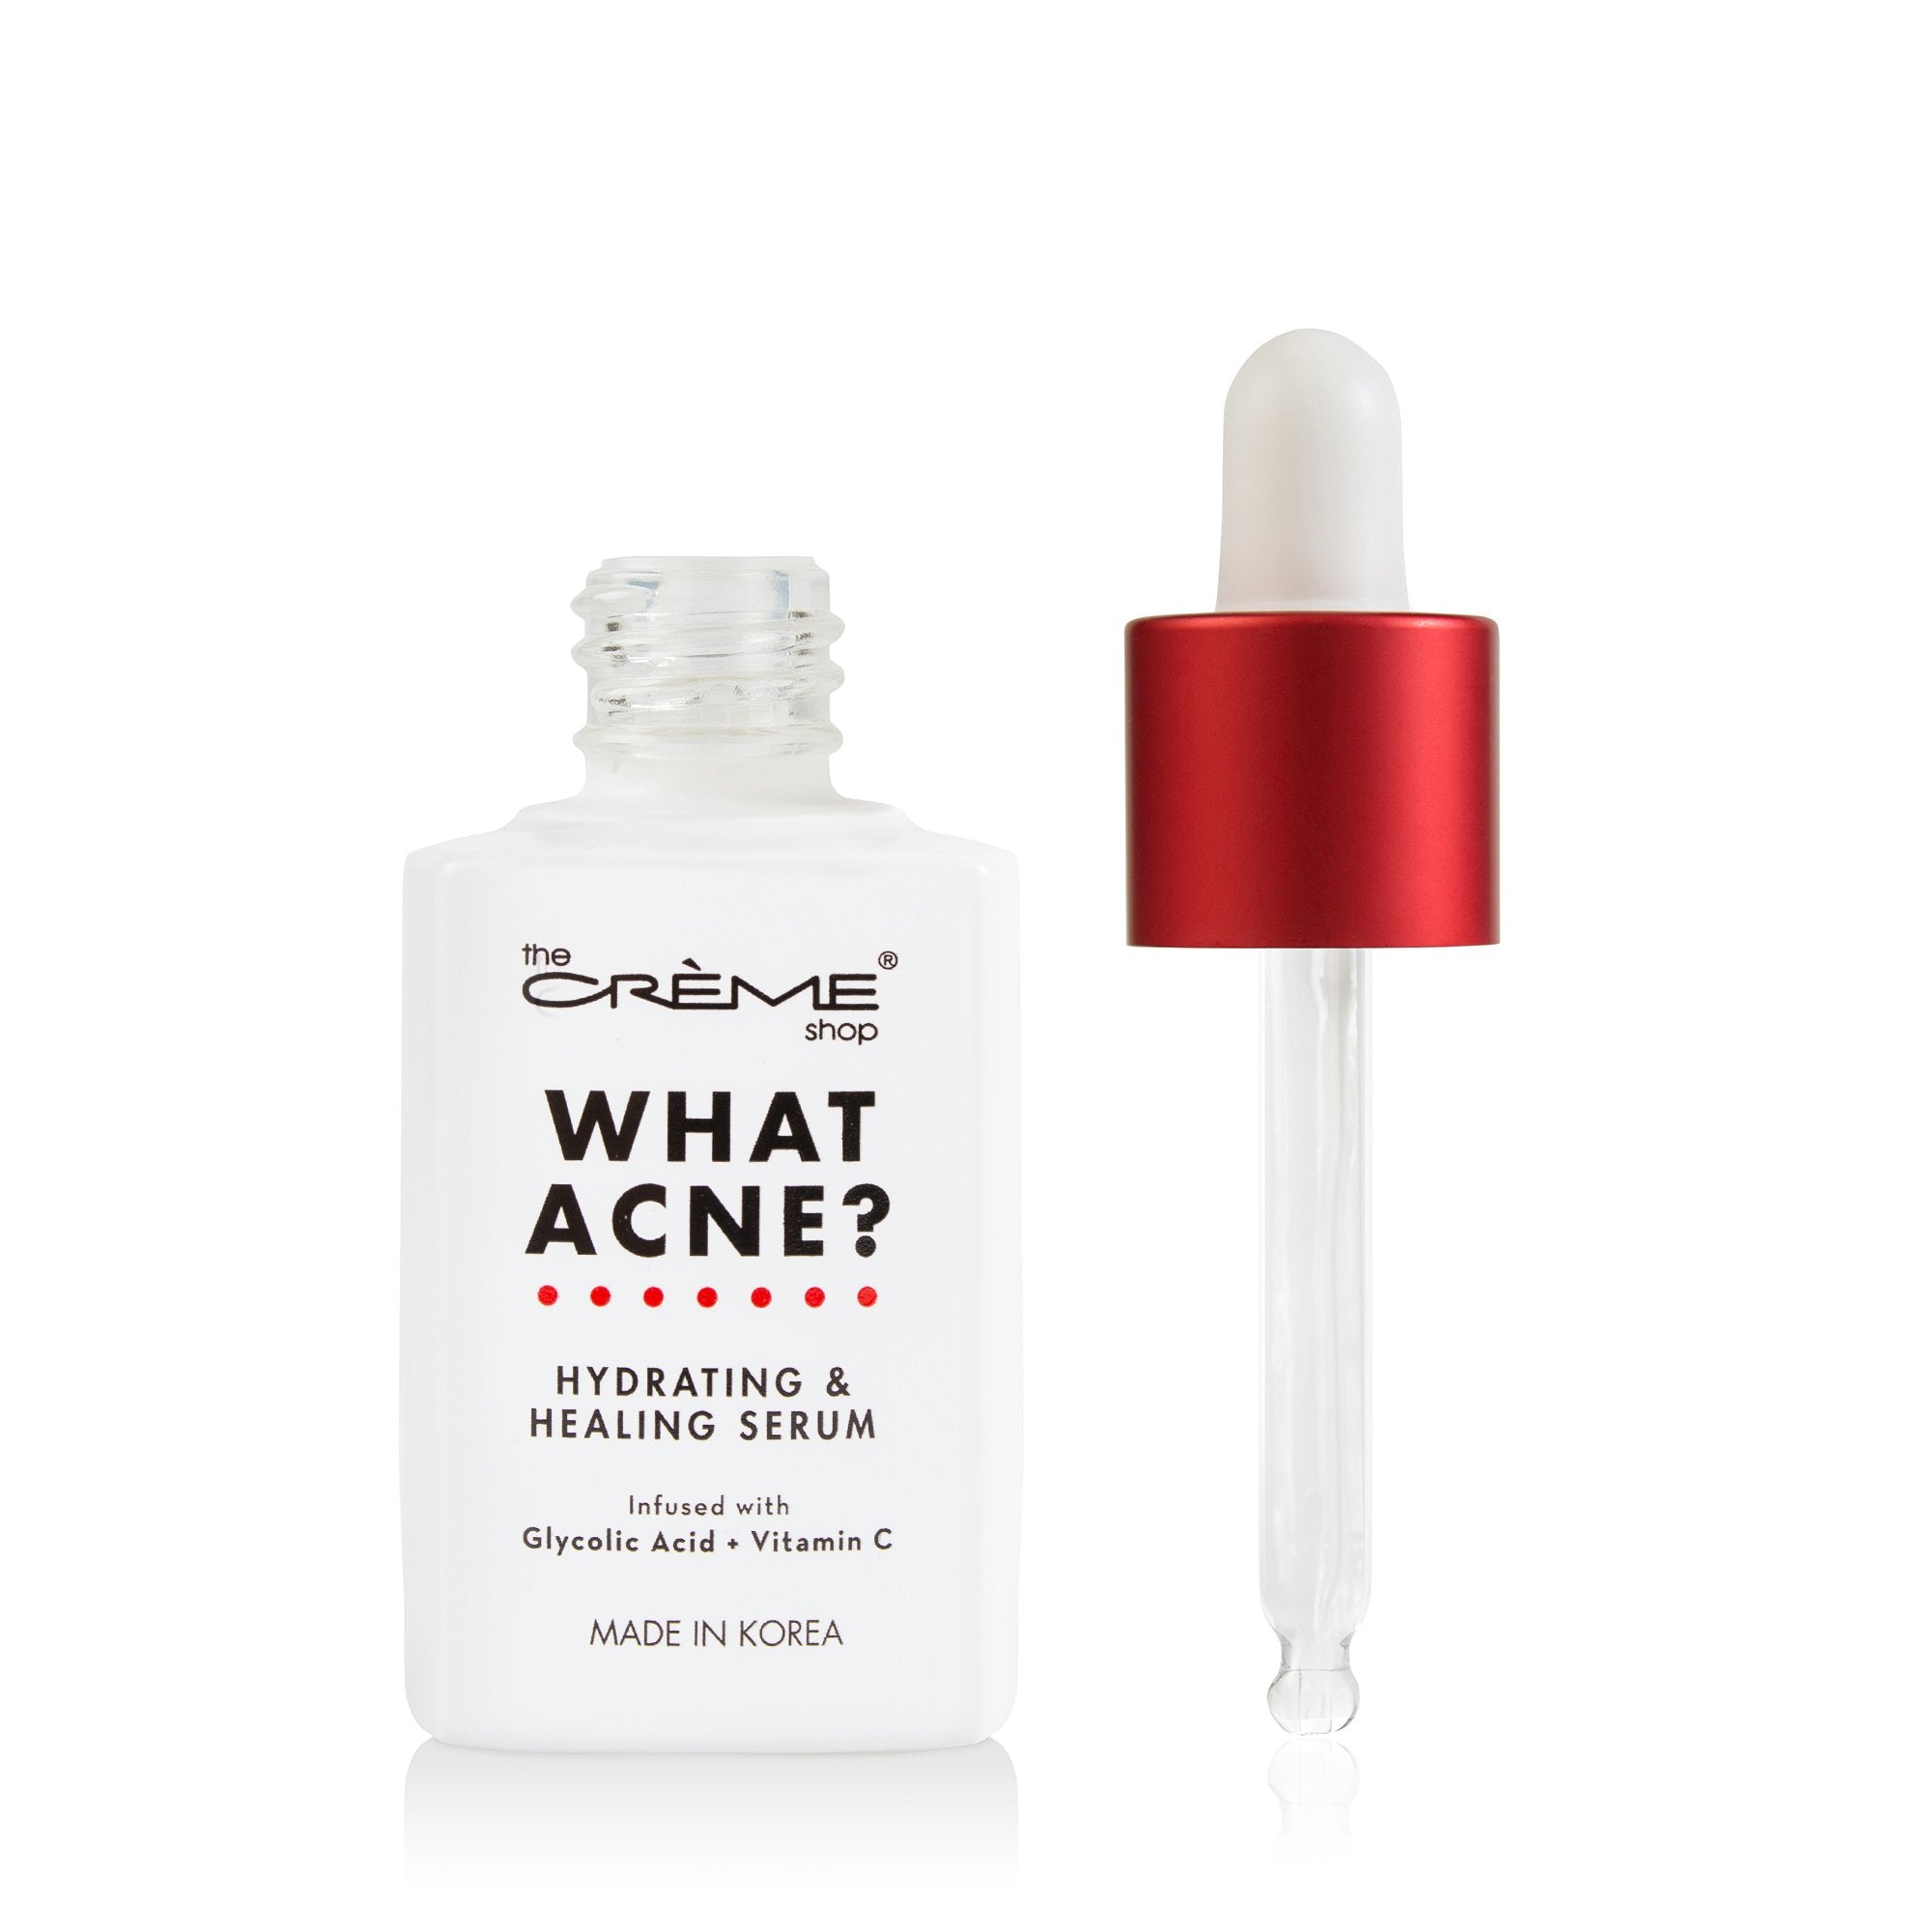 The Creme Shop - What Acne? - Hydrating & Healing Serum